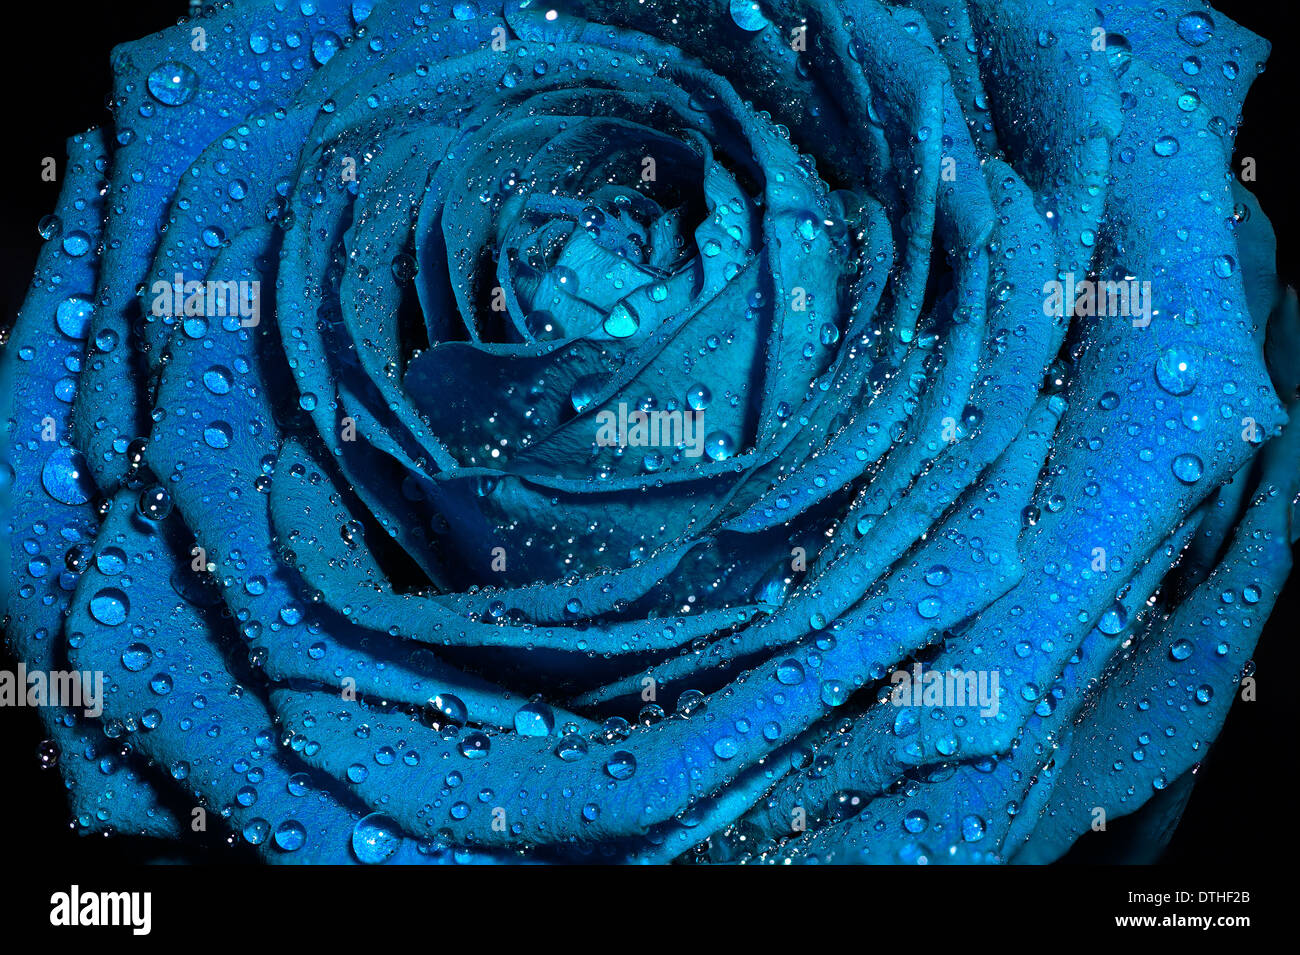 Blue Rose With Water Drops On Petals Stock Photo Alamy